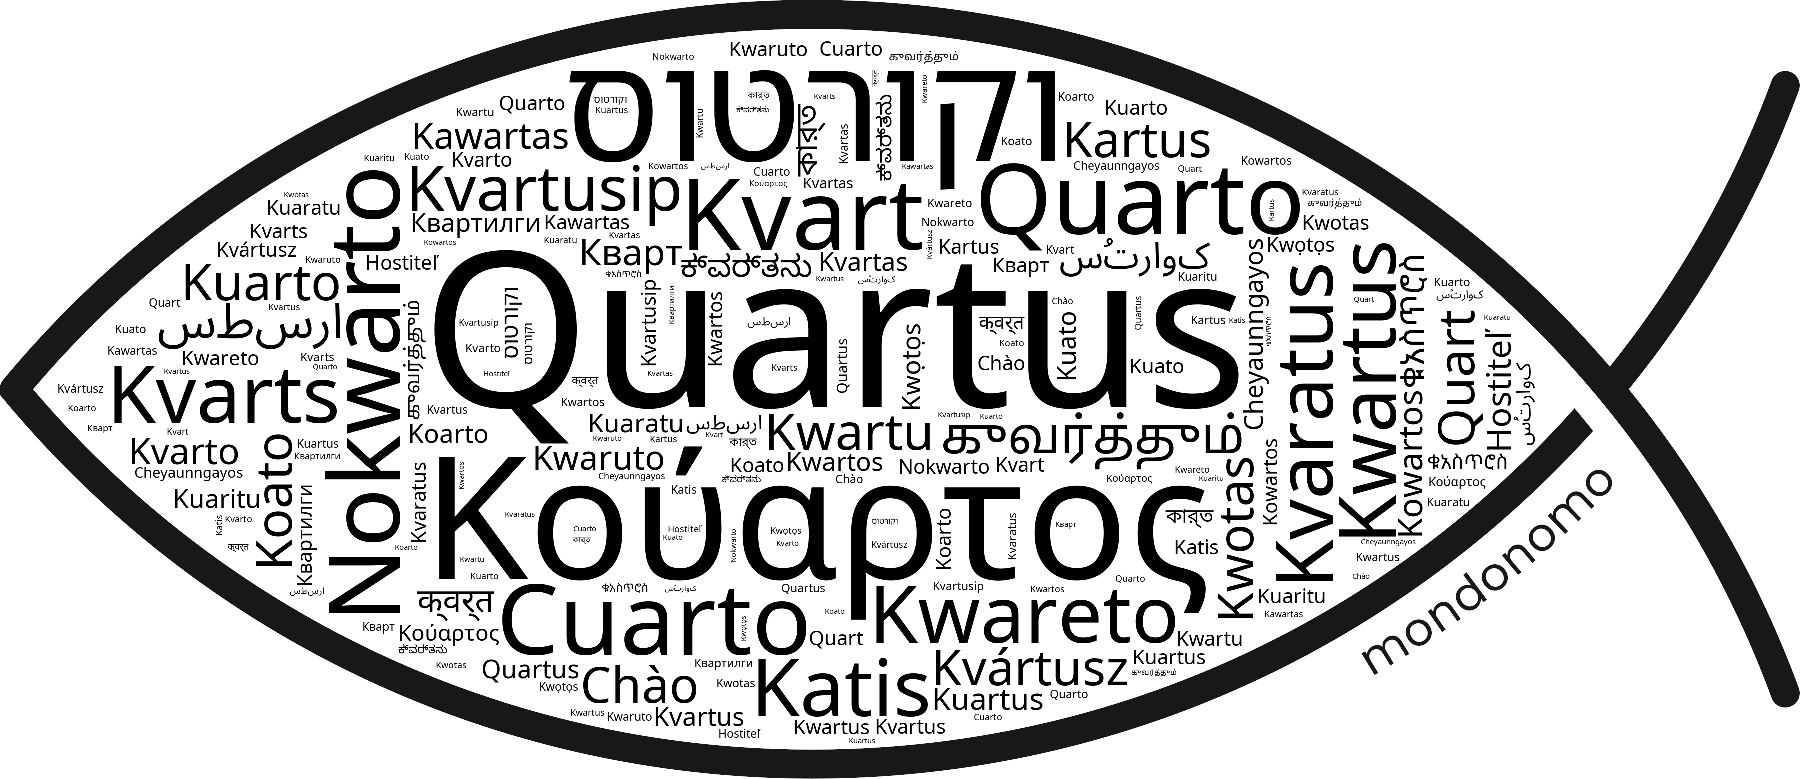 Name Quartus in the world's Bibles